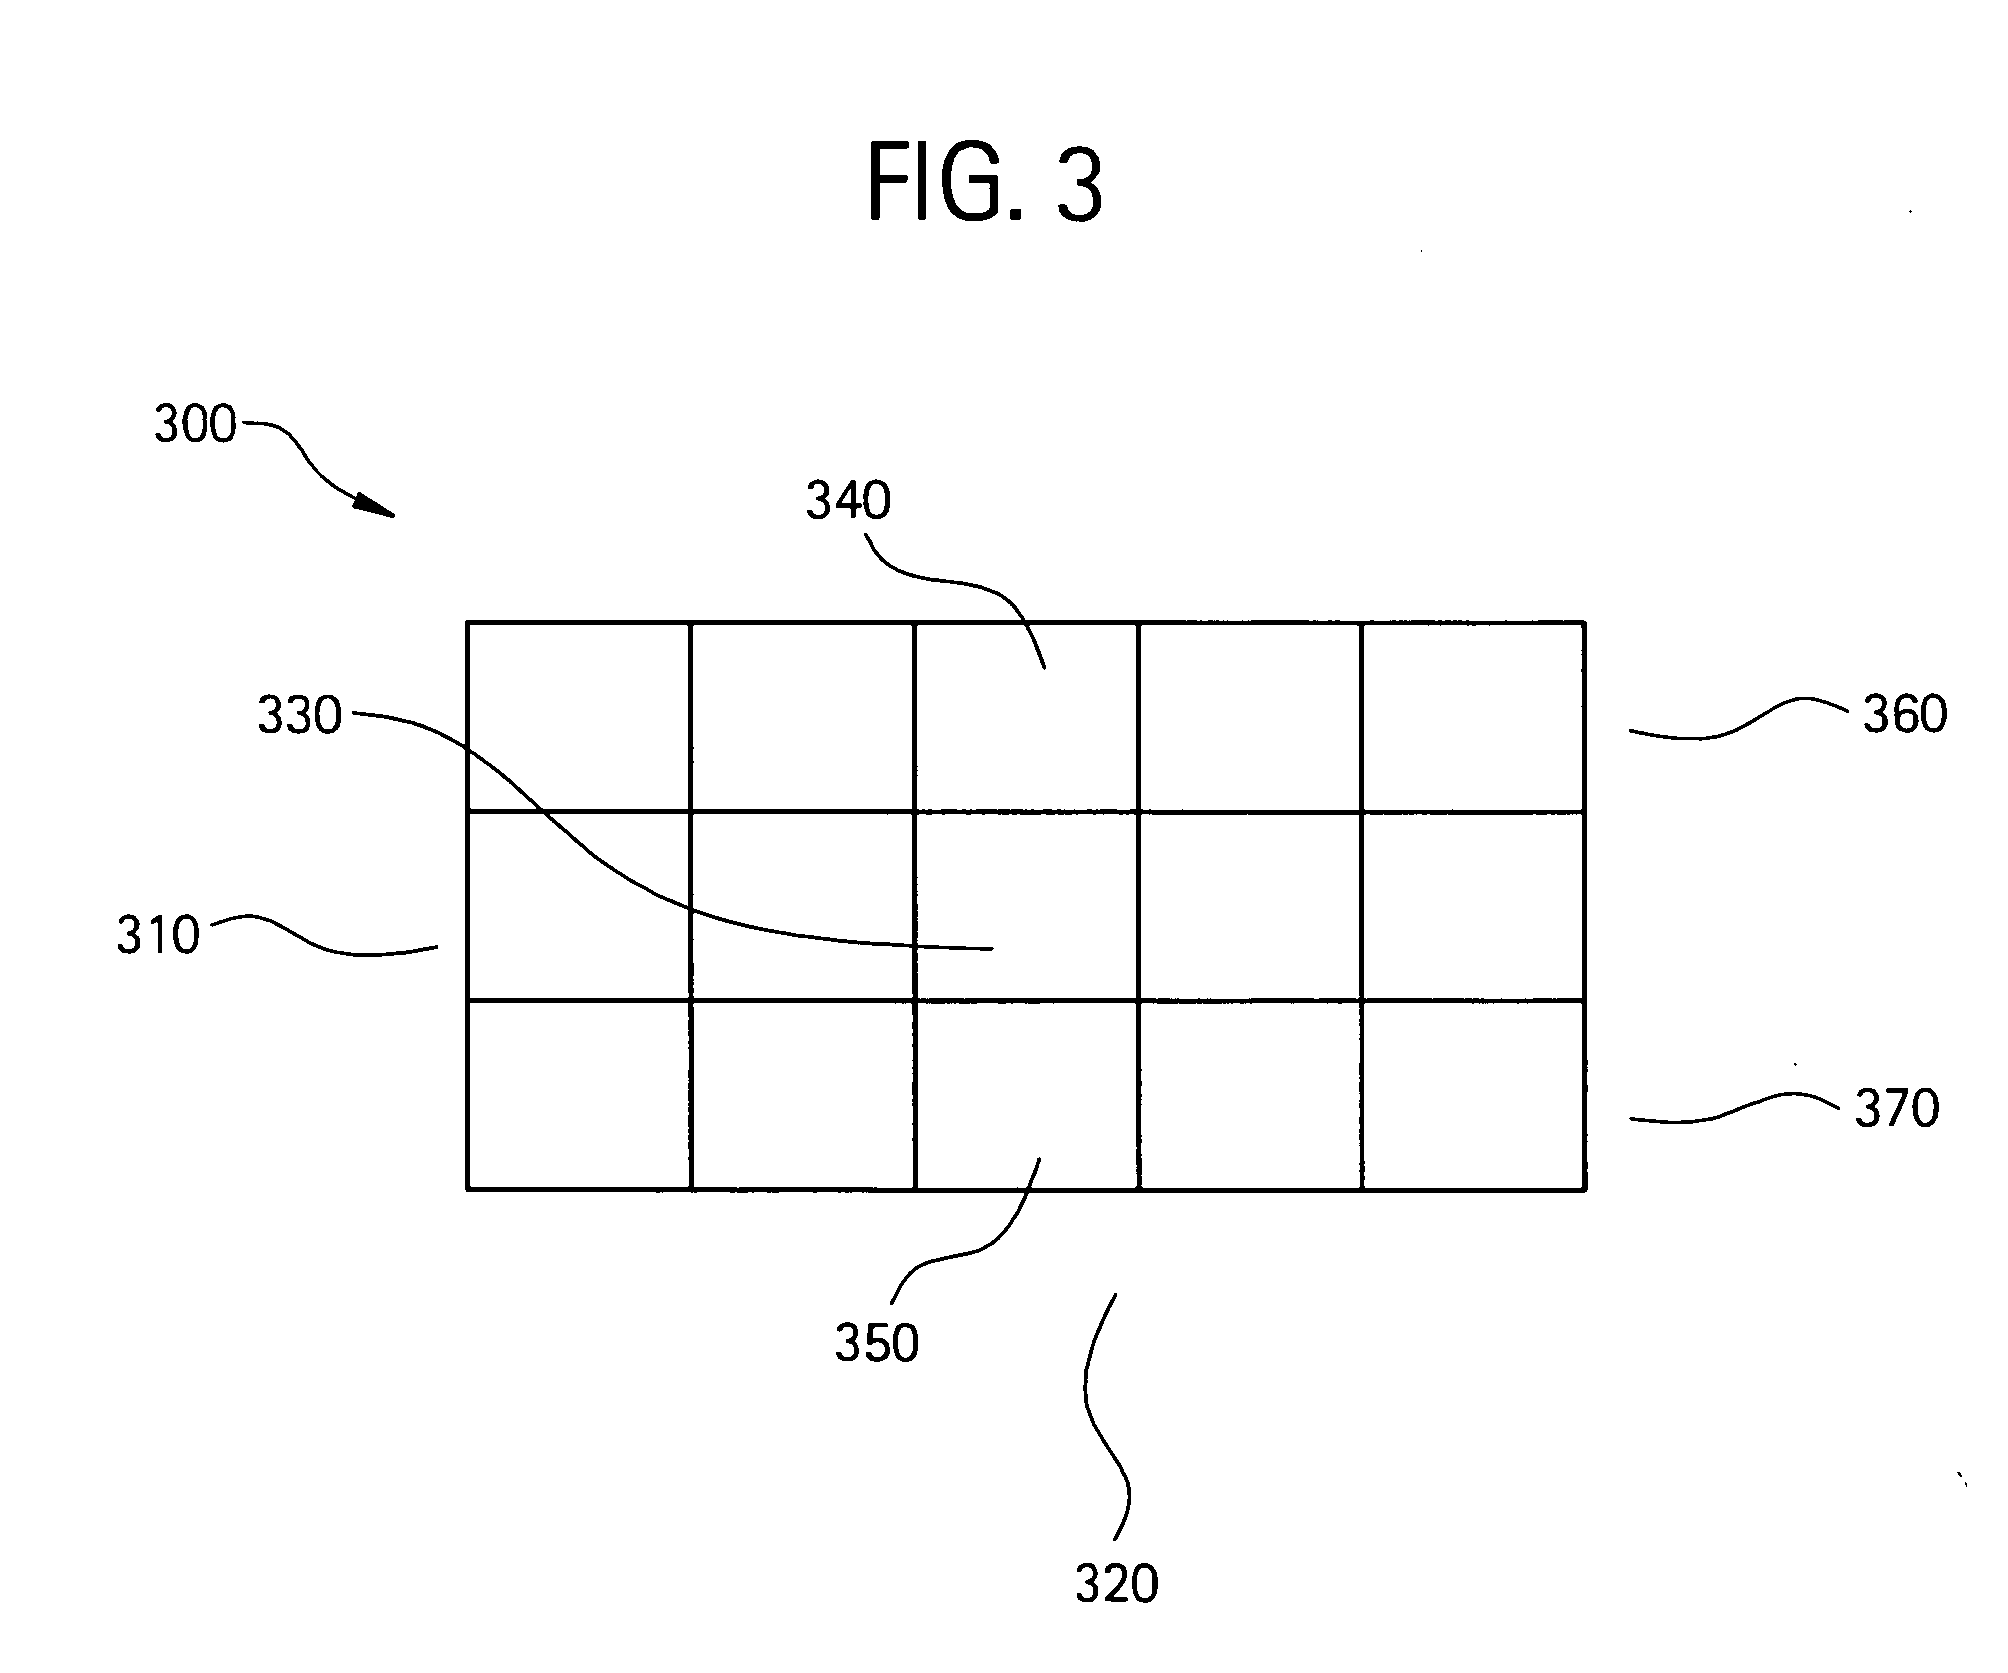 System and method for defective detector cell and DAS channel correction